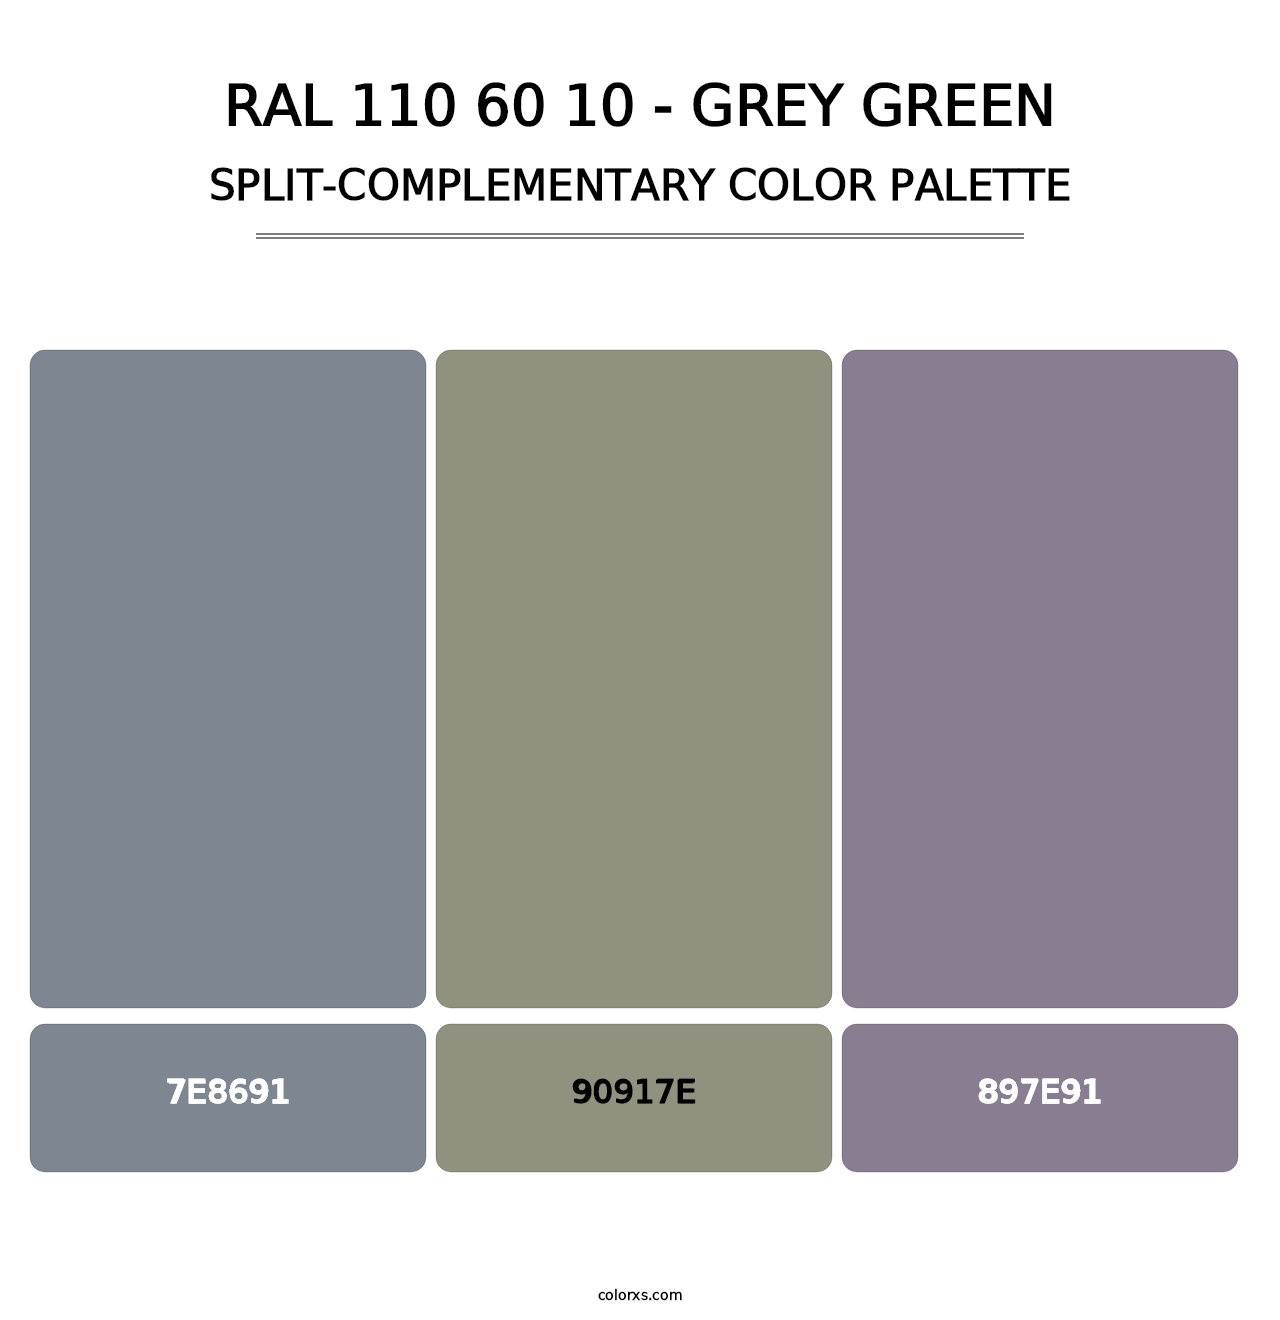 RAL 110 60 10 - Grey Green - Split-Complementary Color Palette